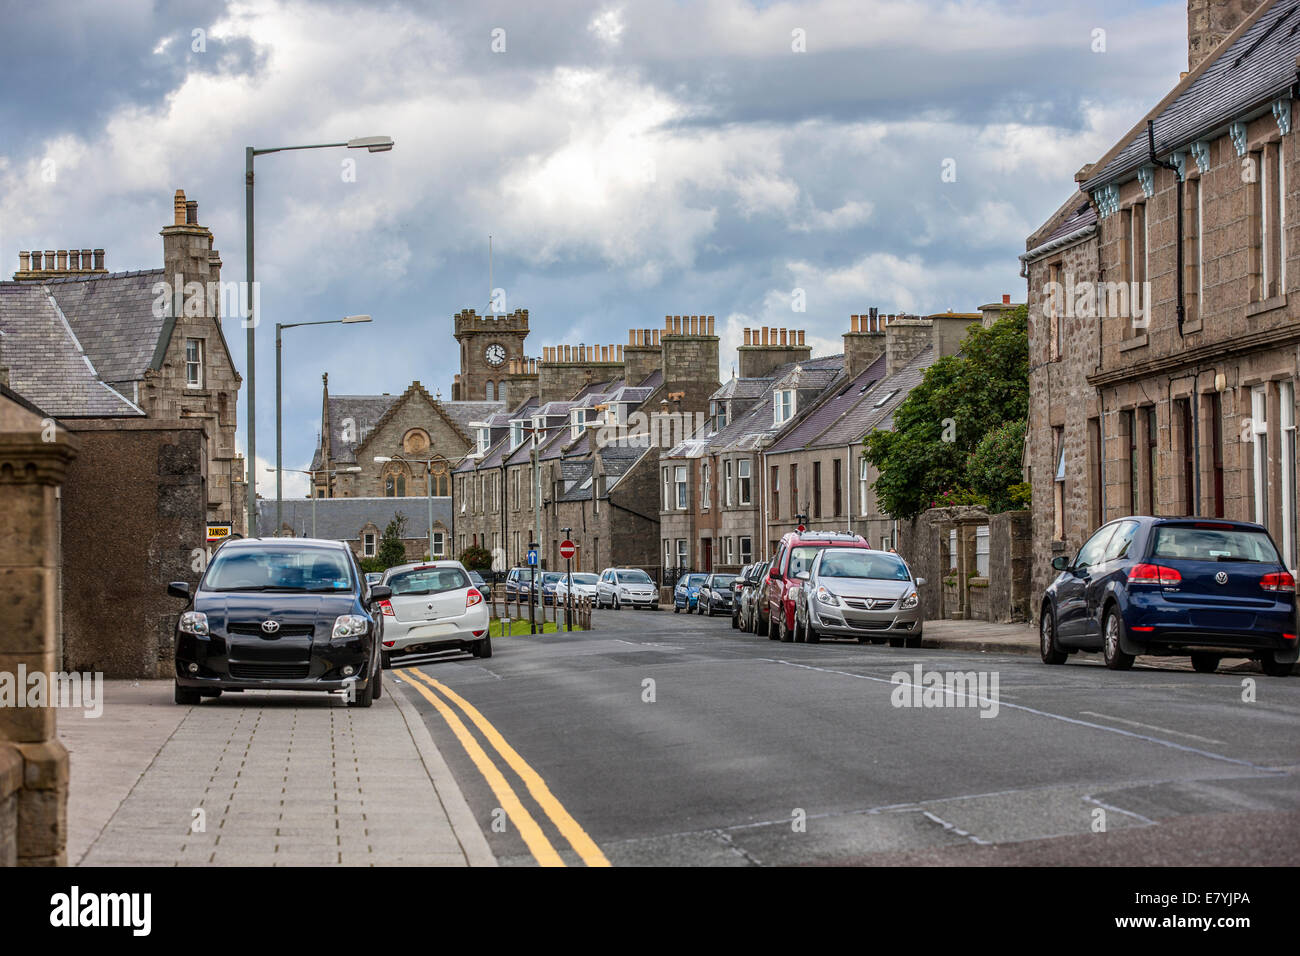 Lerwick, Shetland, Scotland, United Kingdom. Street View of the old city of 400 years (17th century) with its characteristic gra Stock Photo